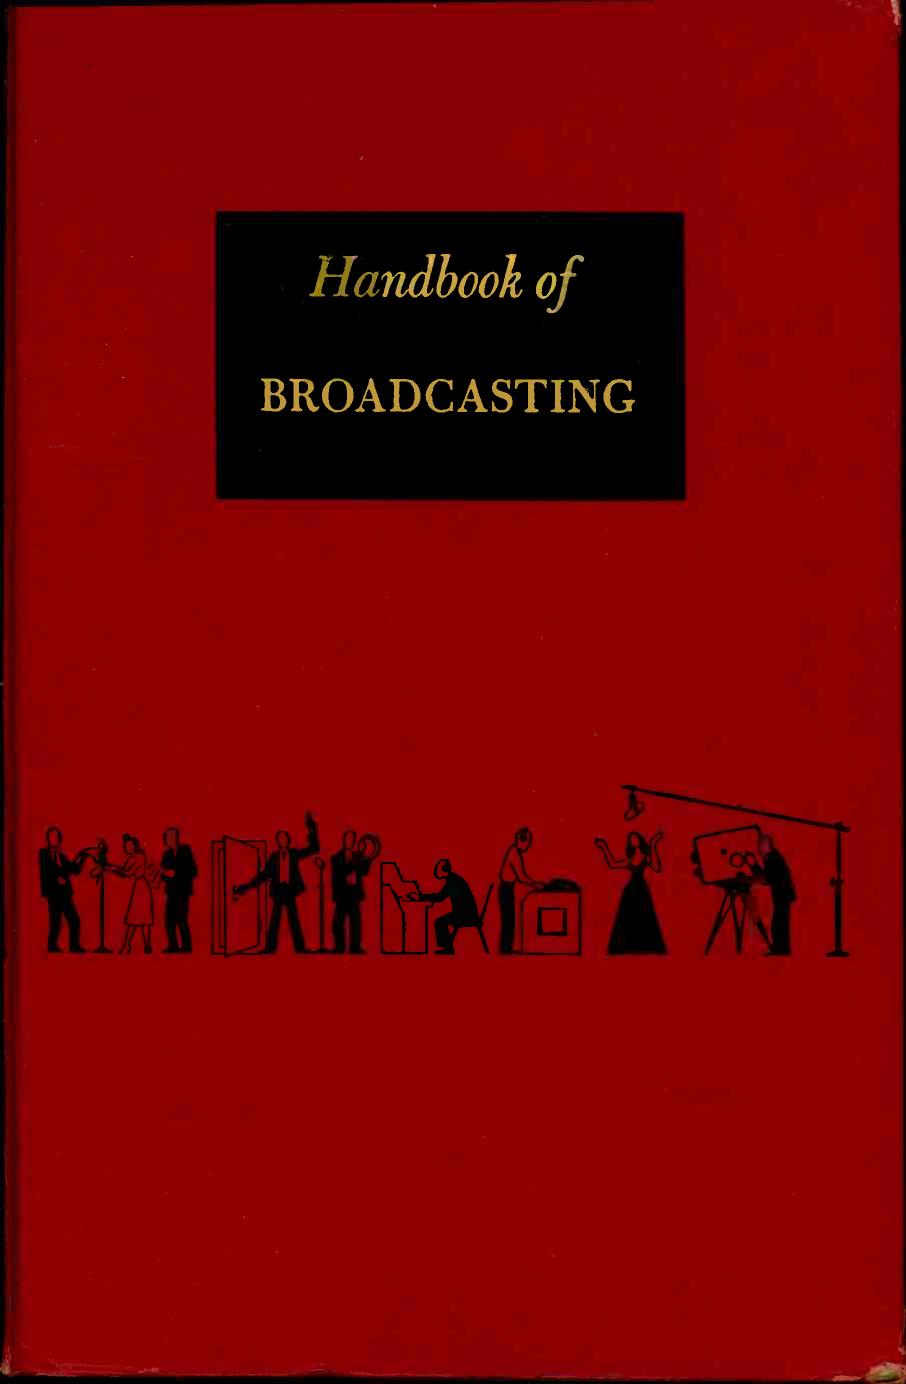 Abbot-Handbook-of-Broadcasting-4th-Edition-1957 by Unknown